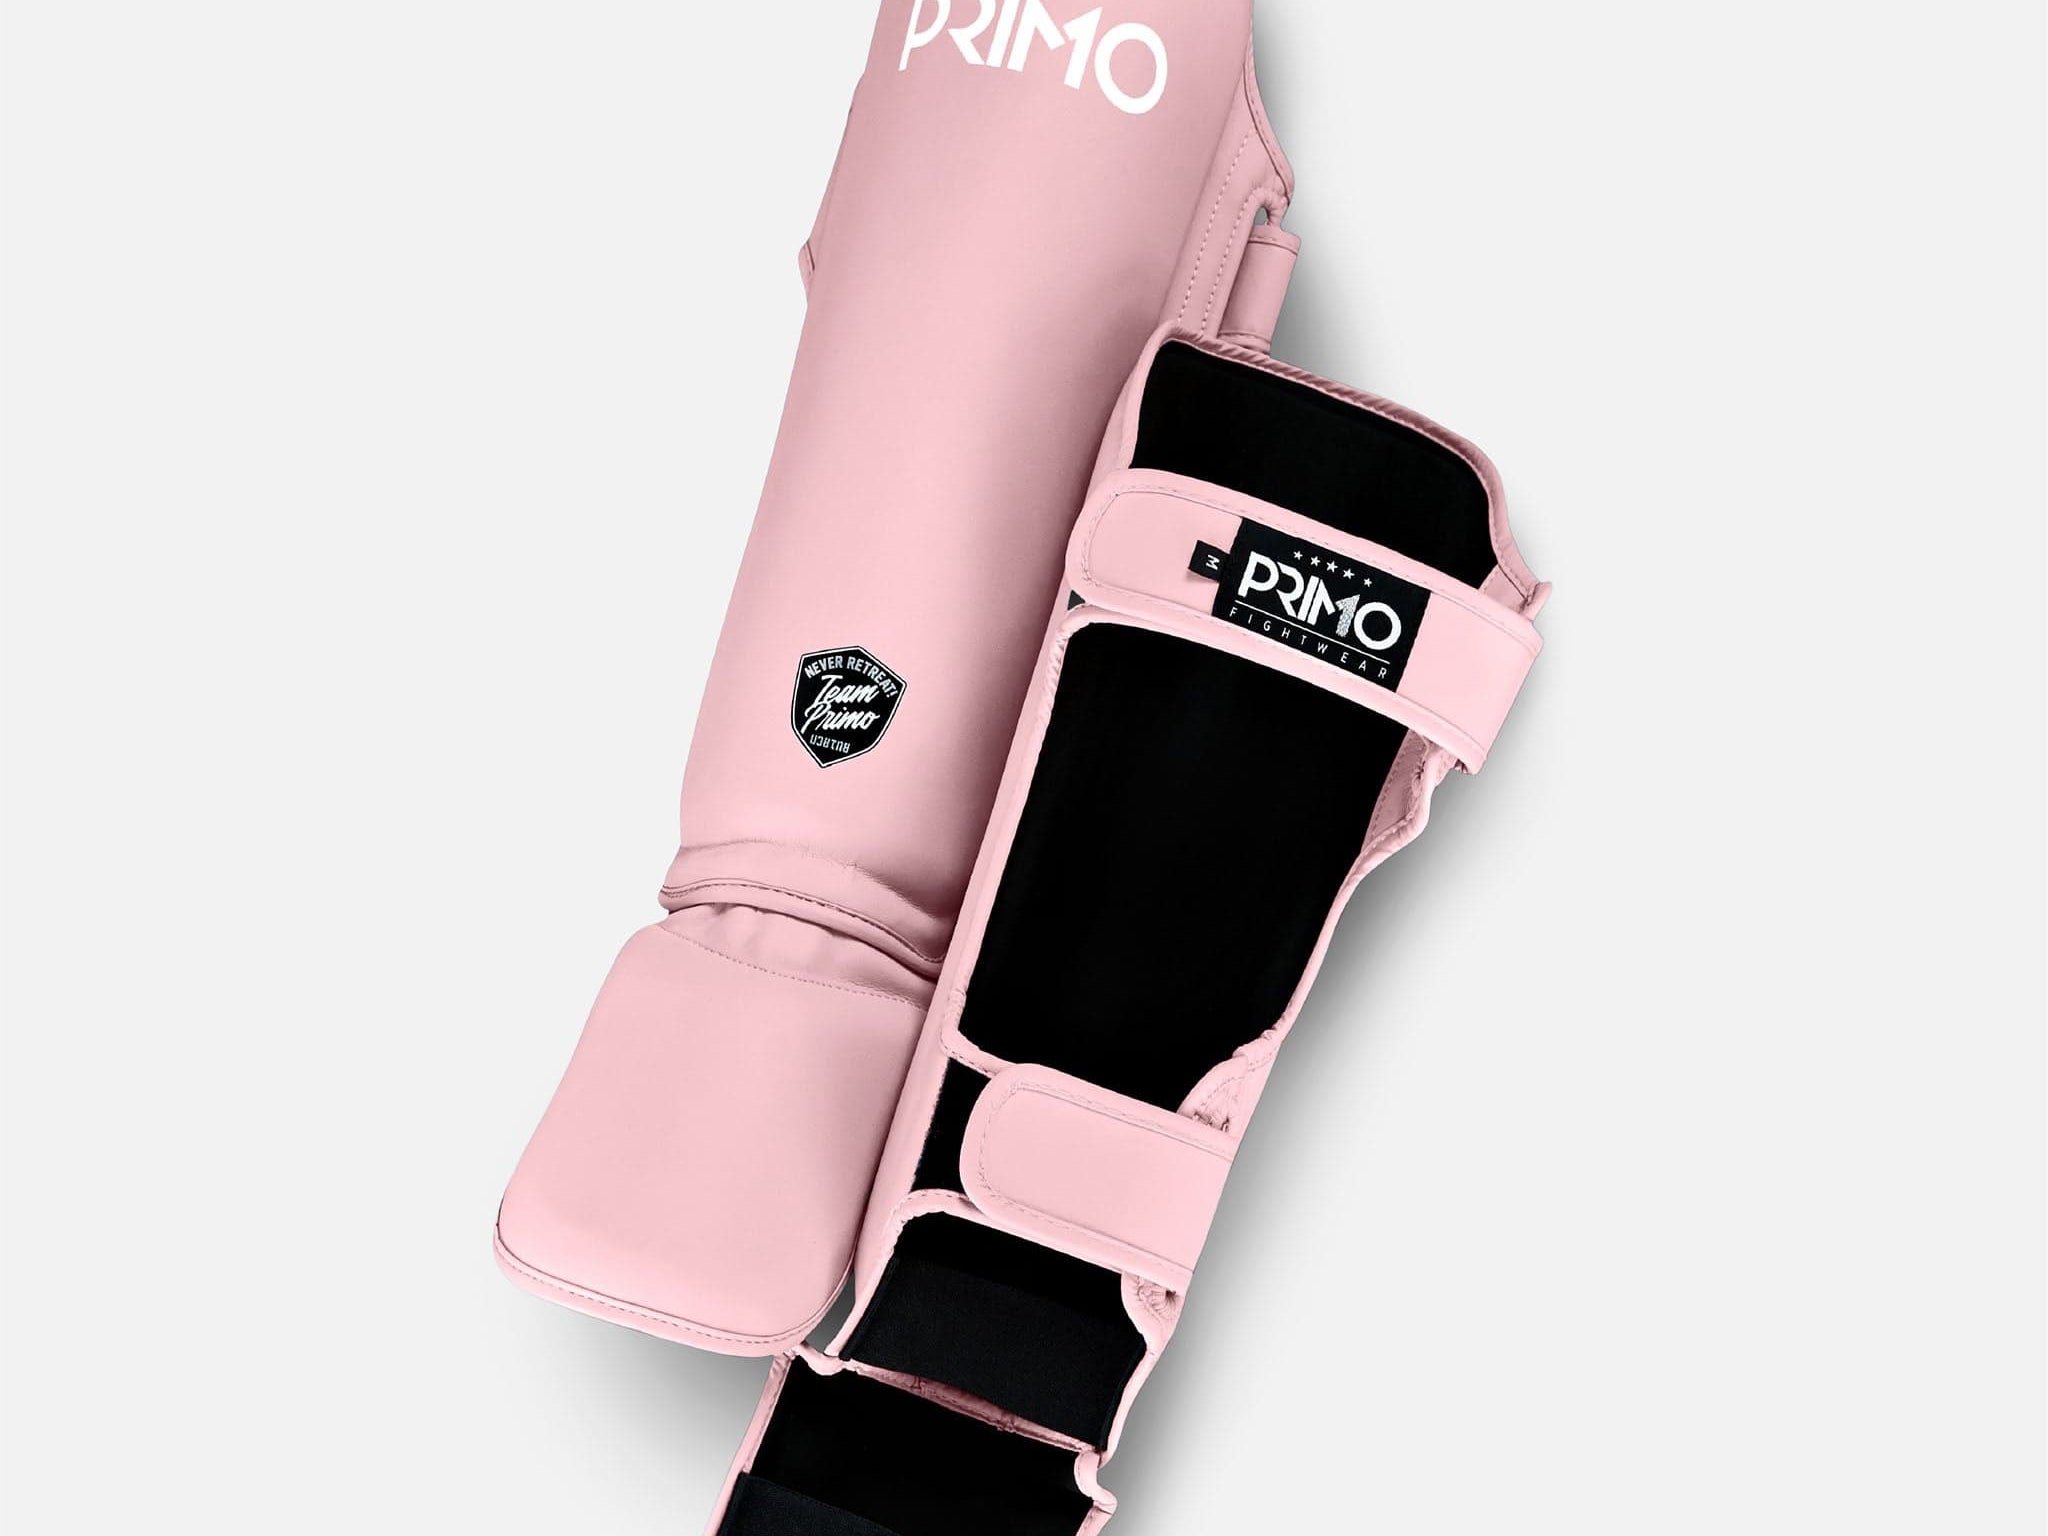 Primo Fight Wear Official Classic Muay Thai Shinguard - Pink